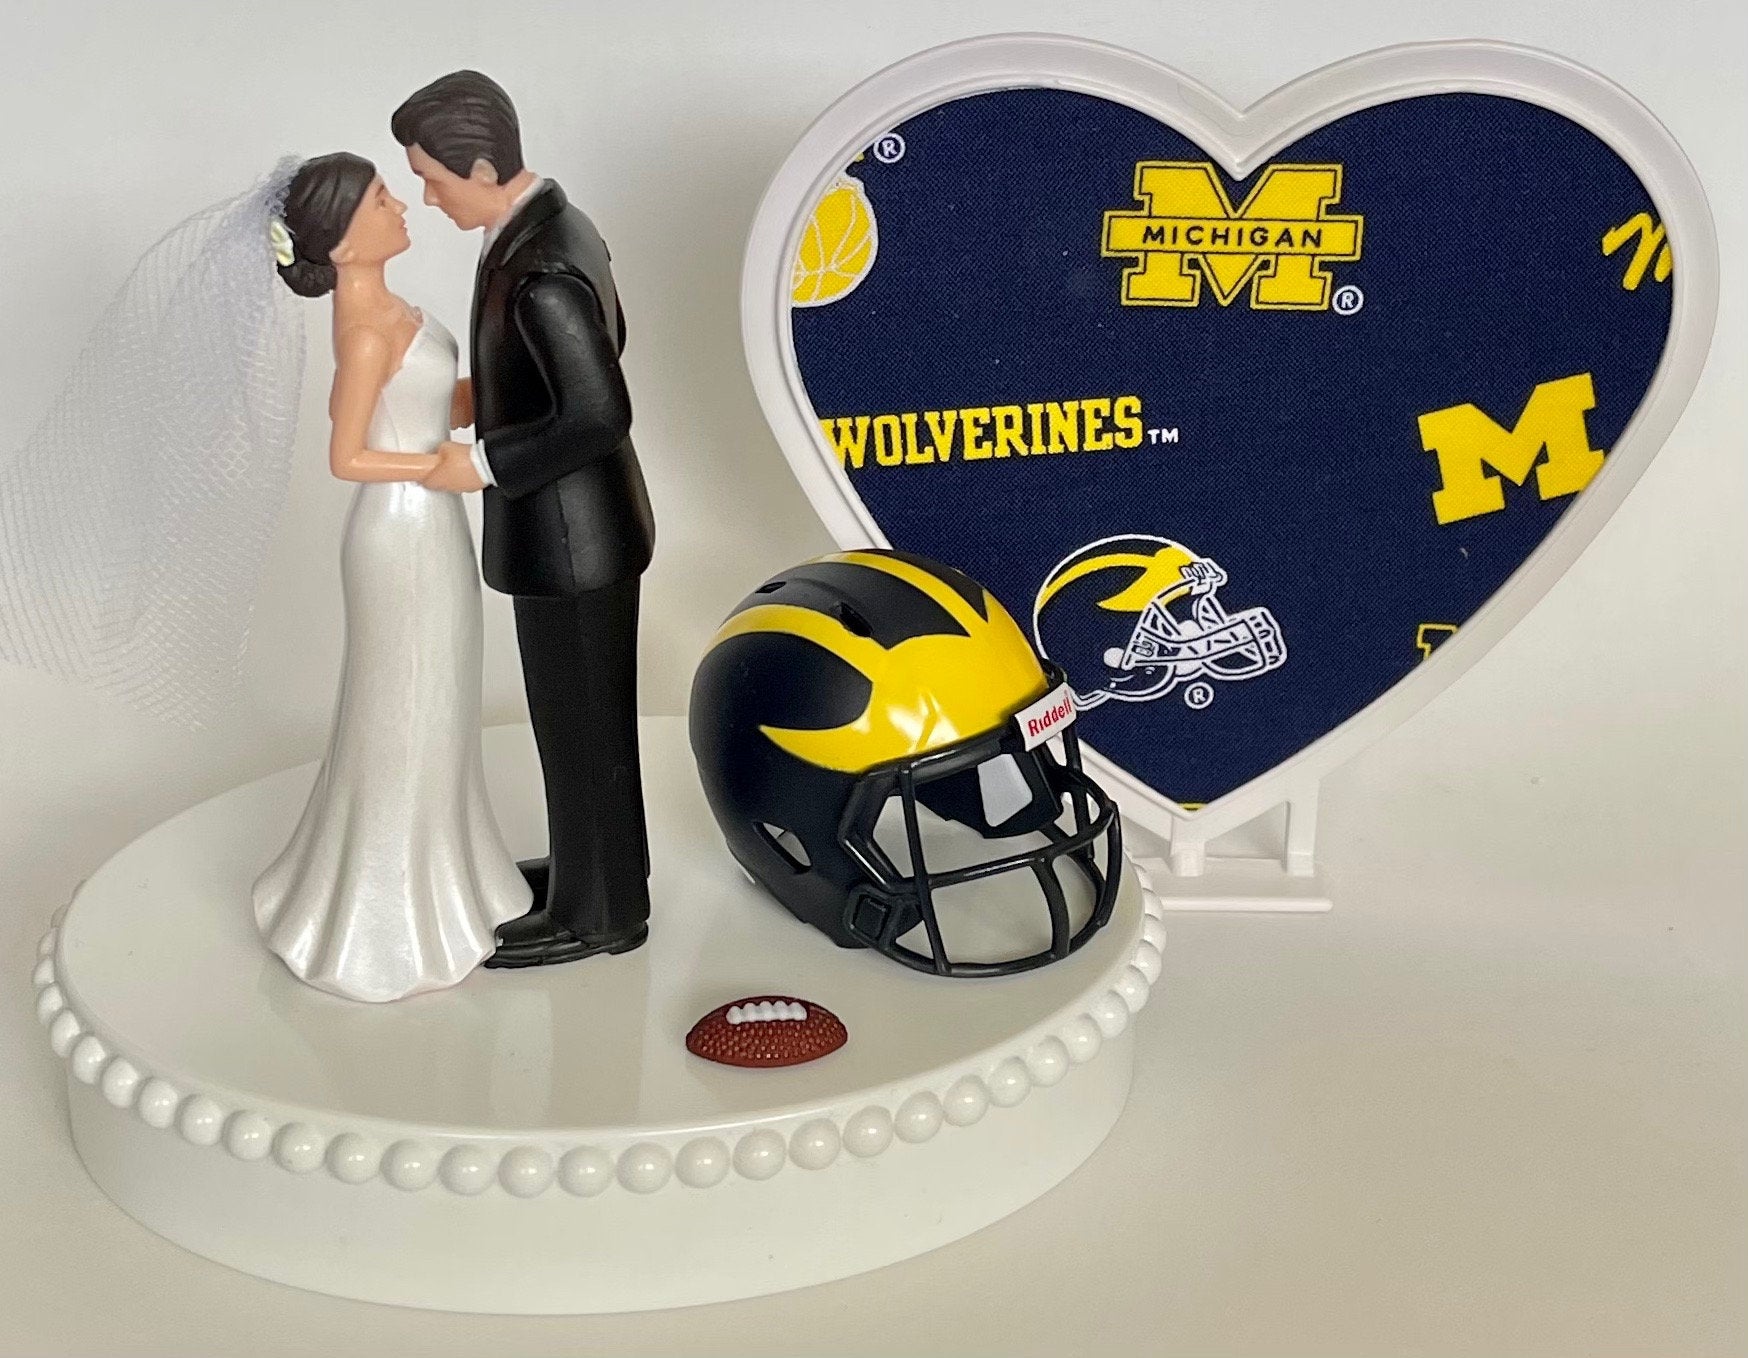 Wedding Cake Topper Michigan Wolverines Football Themed Beautiful Short-Haired Bride and Groom One-of-a-Kind Sports Fan Cake Top Shower Gift